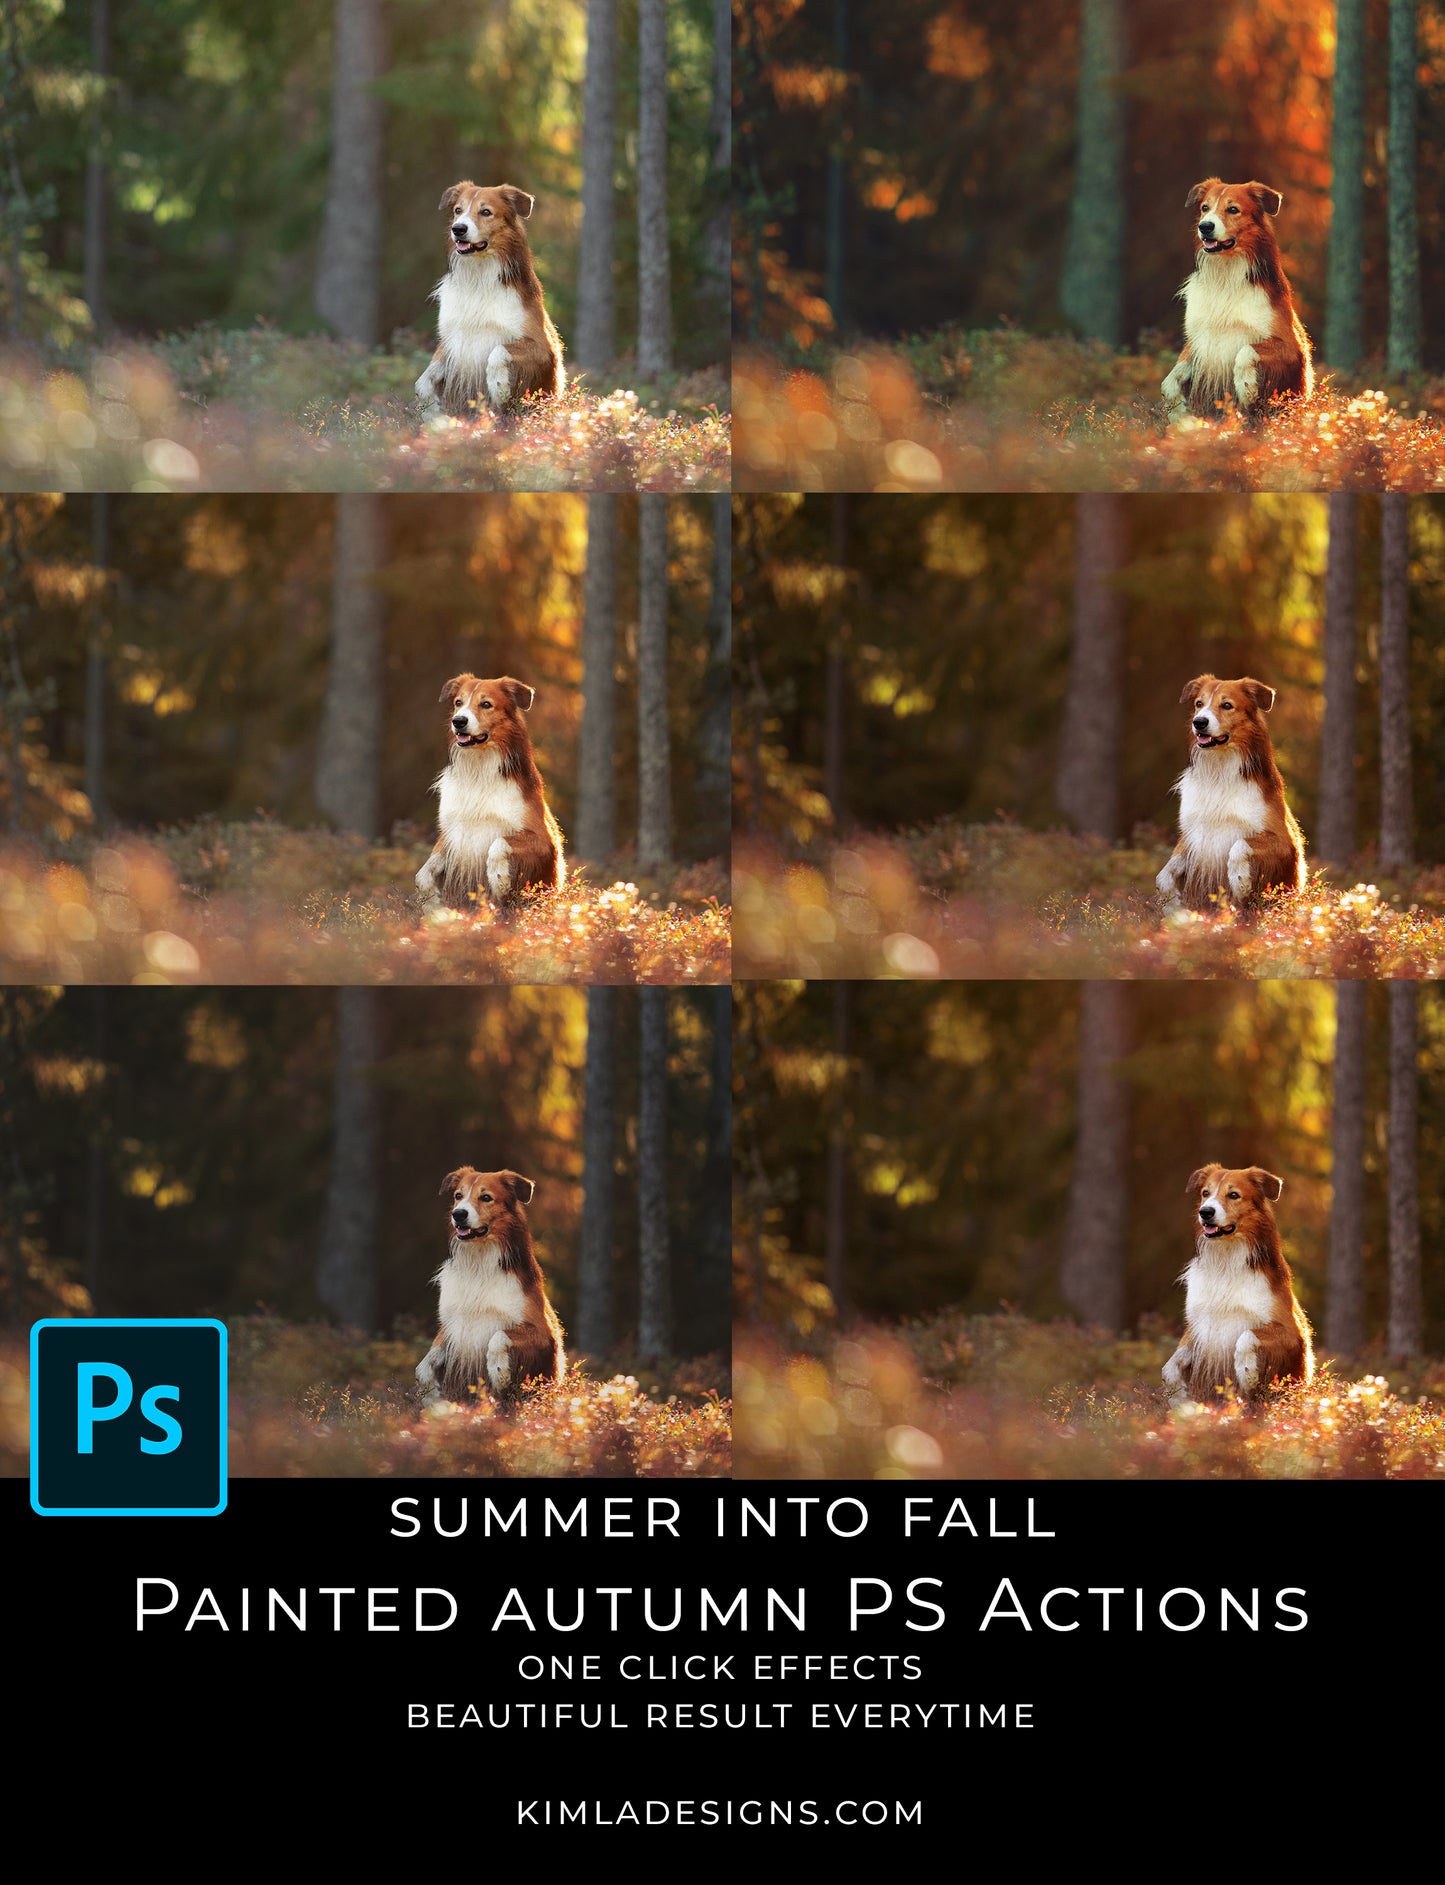 Painted Autumn PS Actions